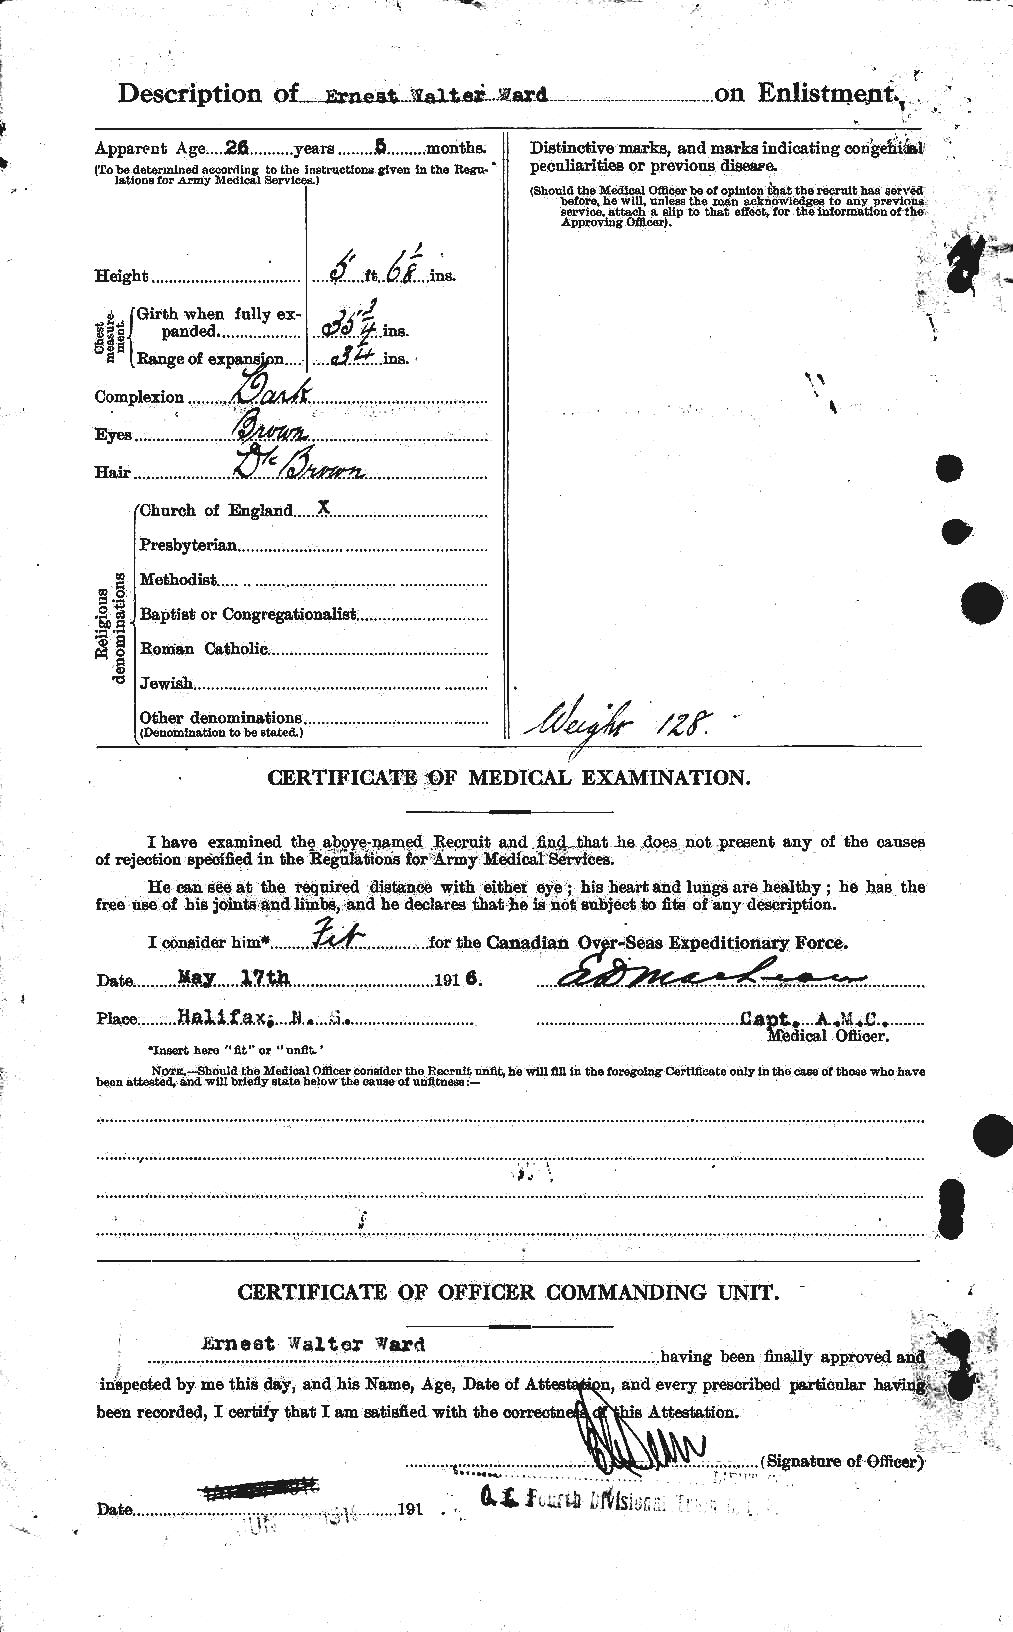 Personnel Records of the First World War - CEF 657673b